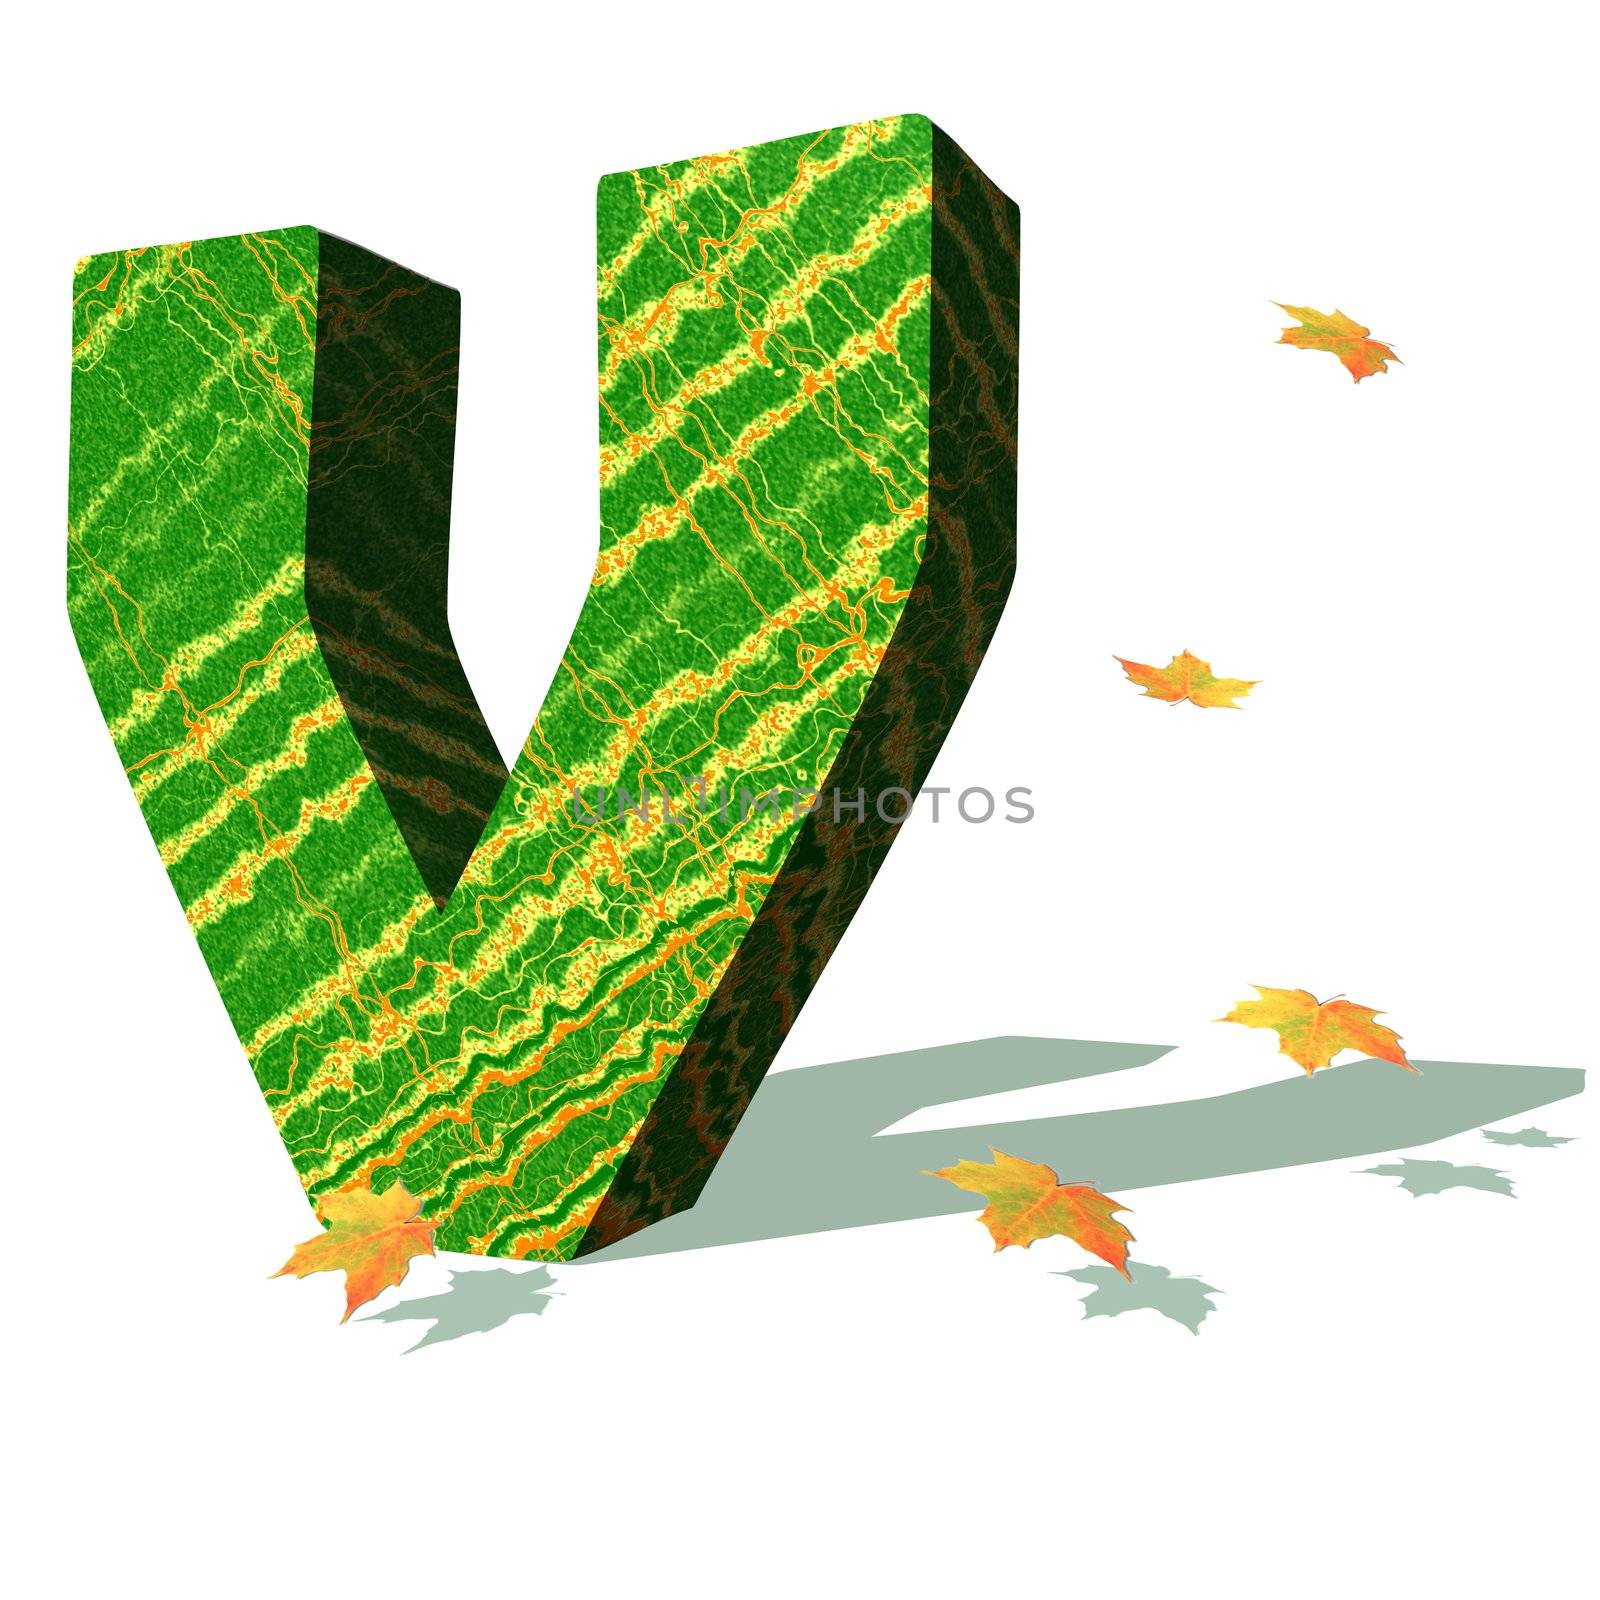 Green ecological V capital letter surrounded by few autumn falling leaves in a white background with shadows